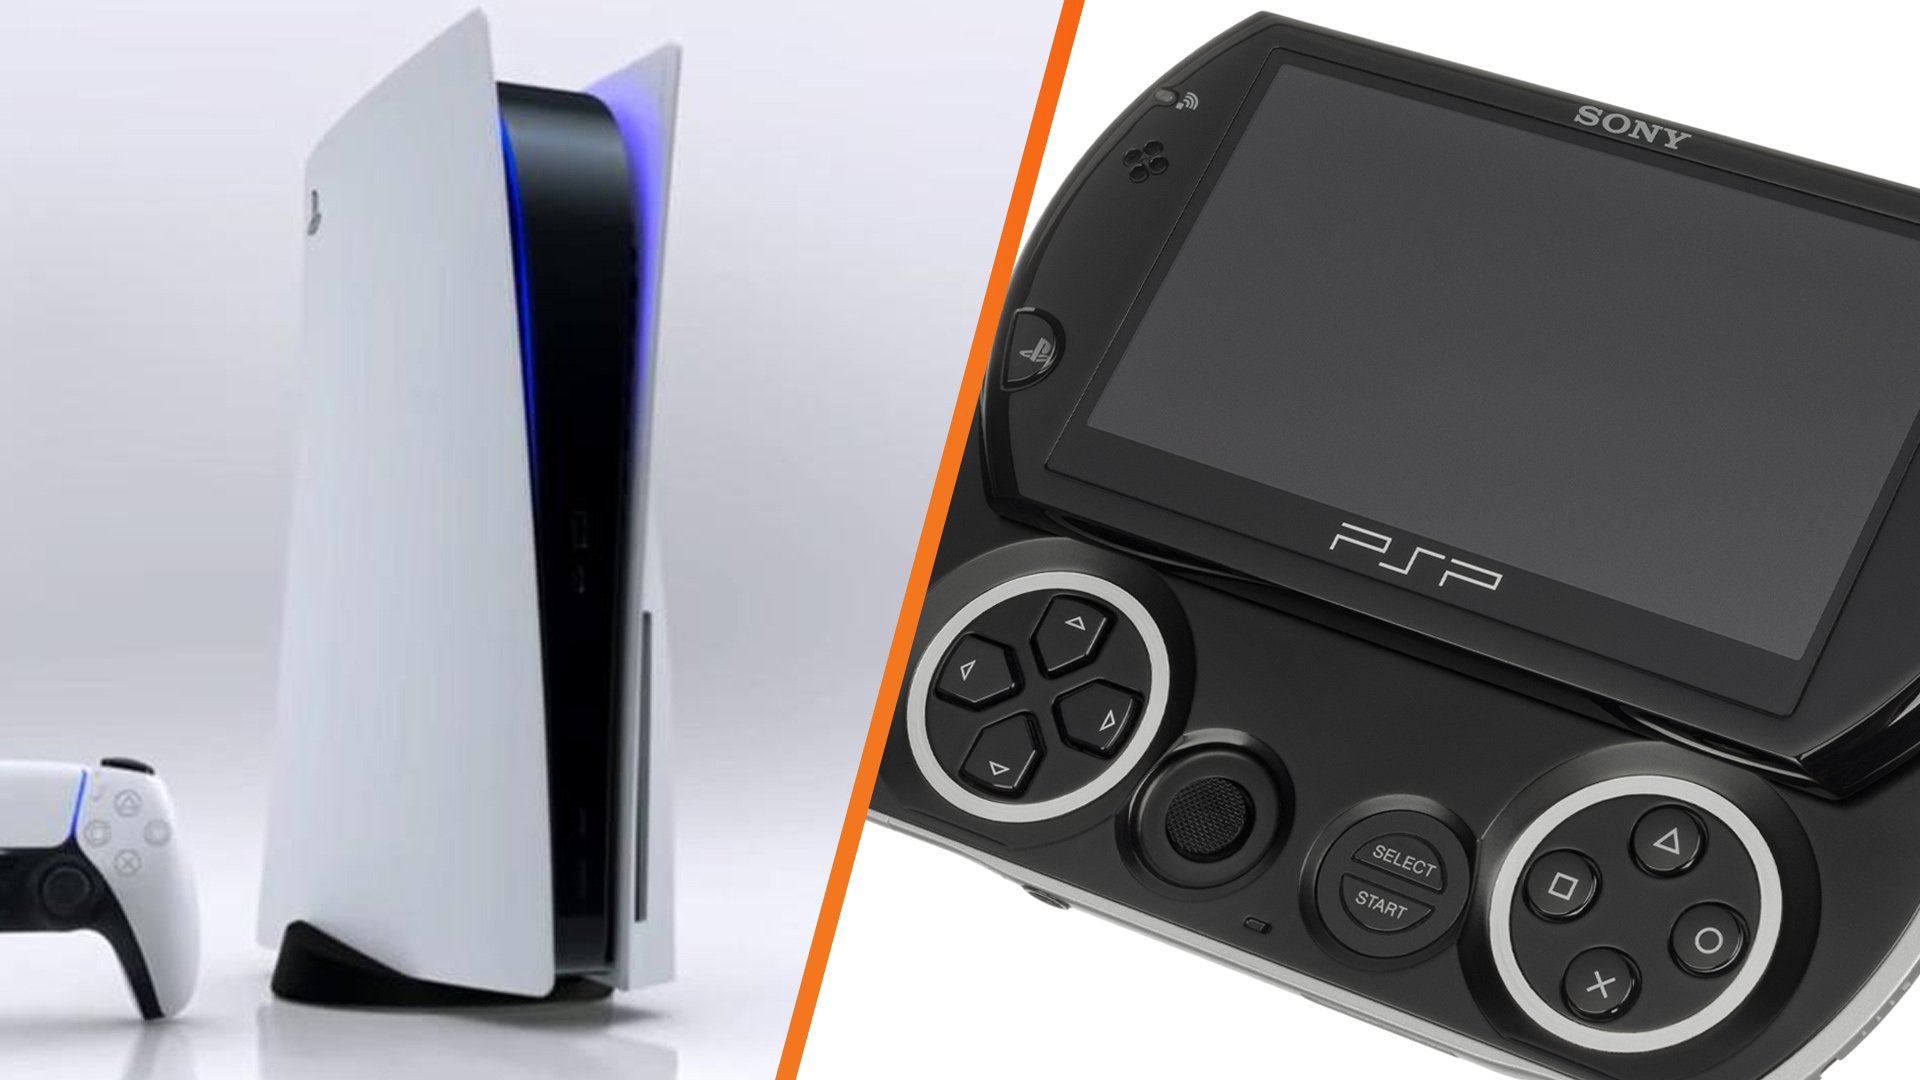 Sony patent suggests PS3-era peripheral compatibility could come to PS5 | VGC - Video Games Chronicle